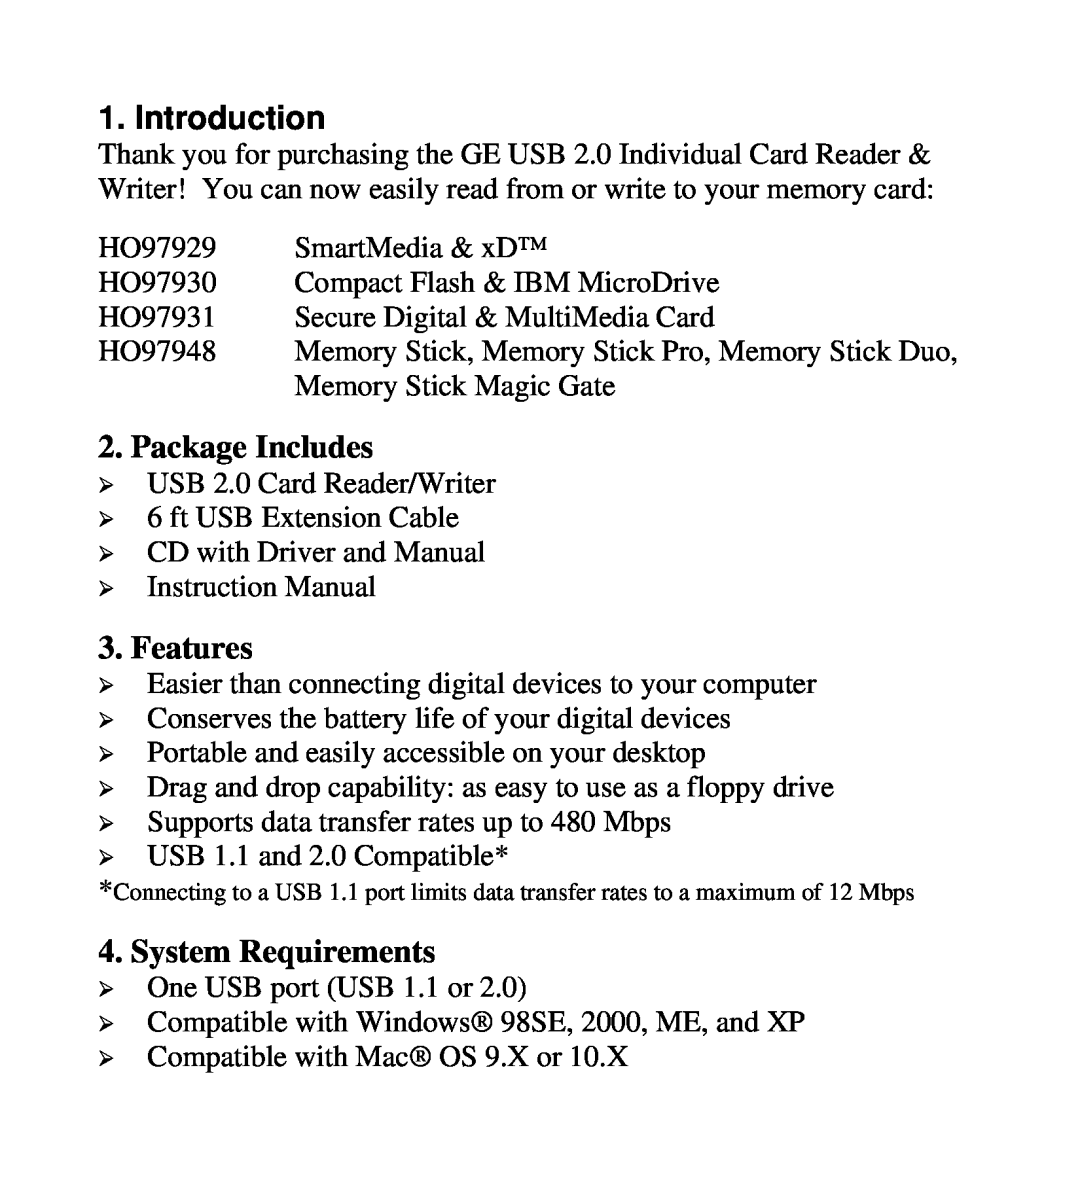 Jasco HO97929, HO97948, HO97931, HO97930 user manual Package Includes, Features, System Requirements, Introduction 